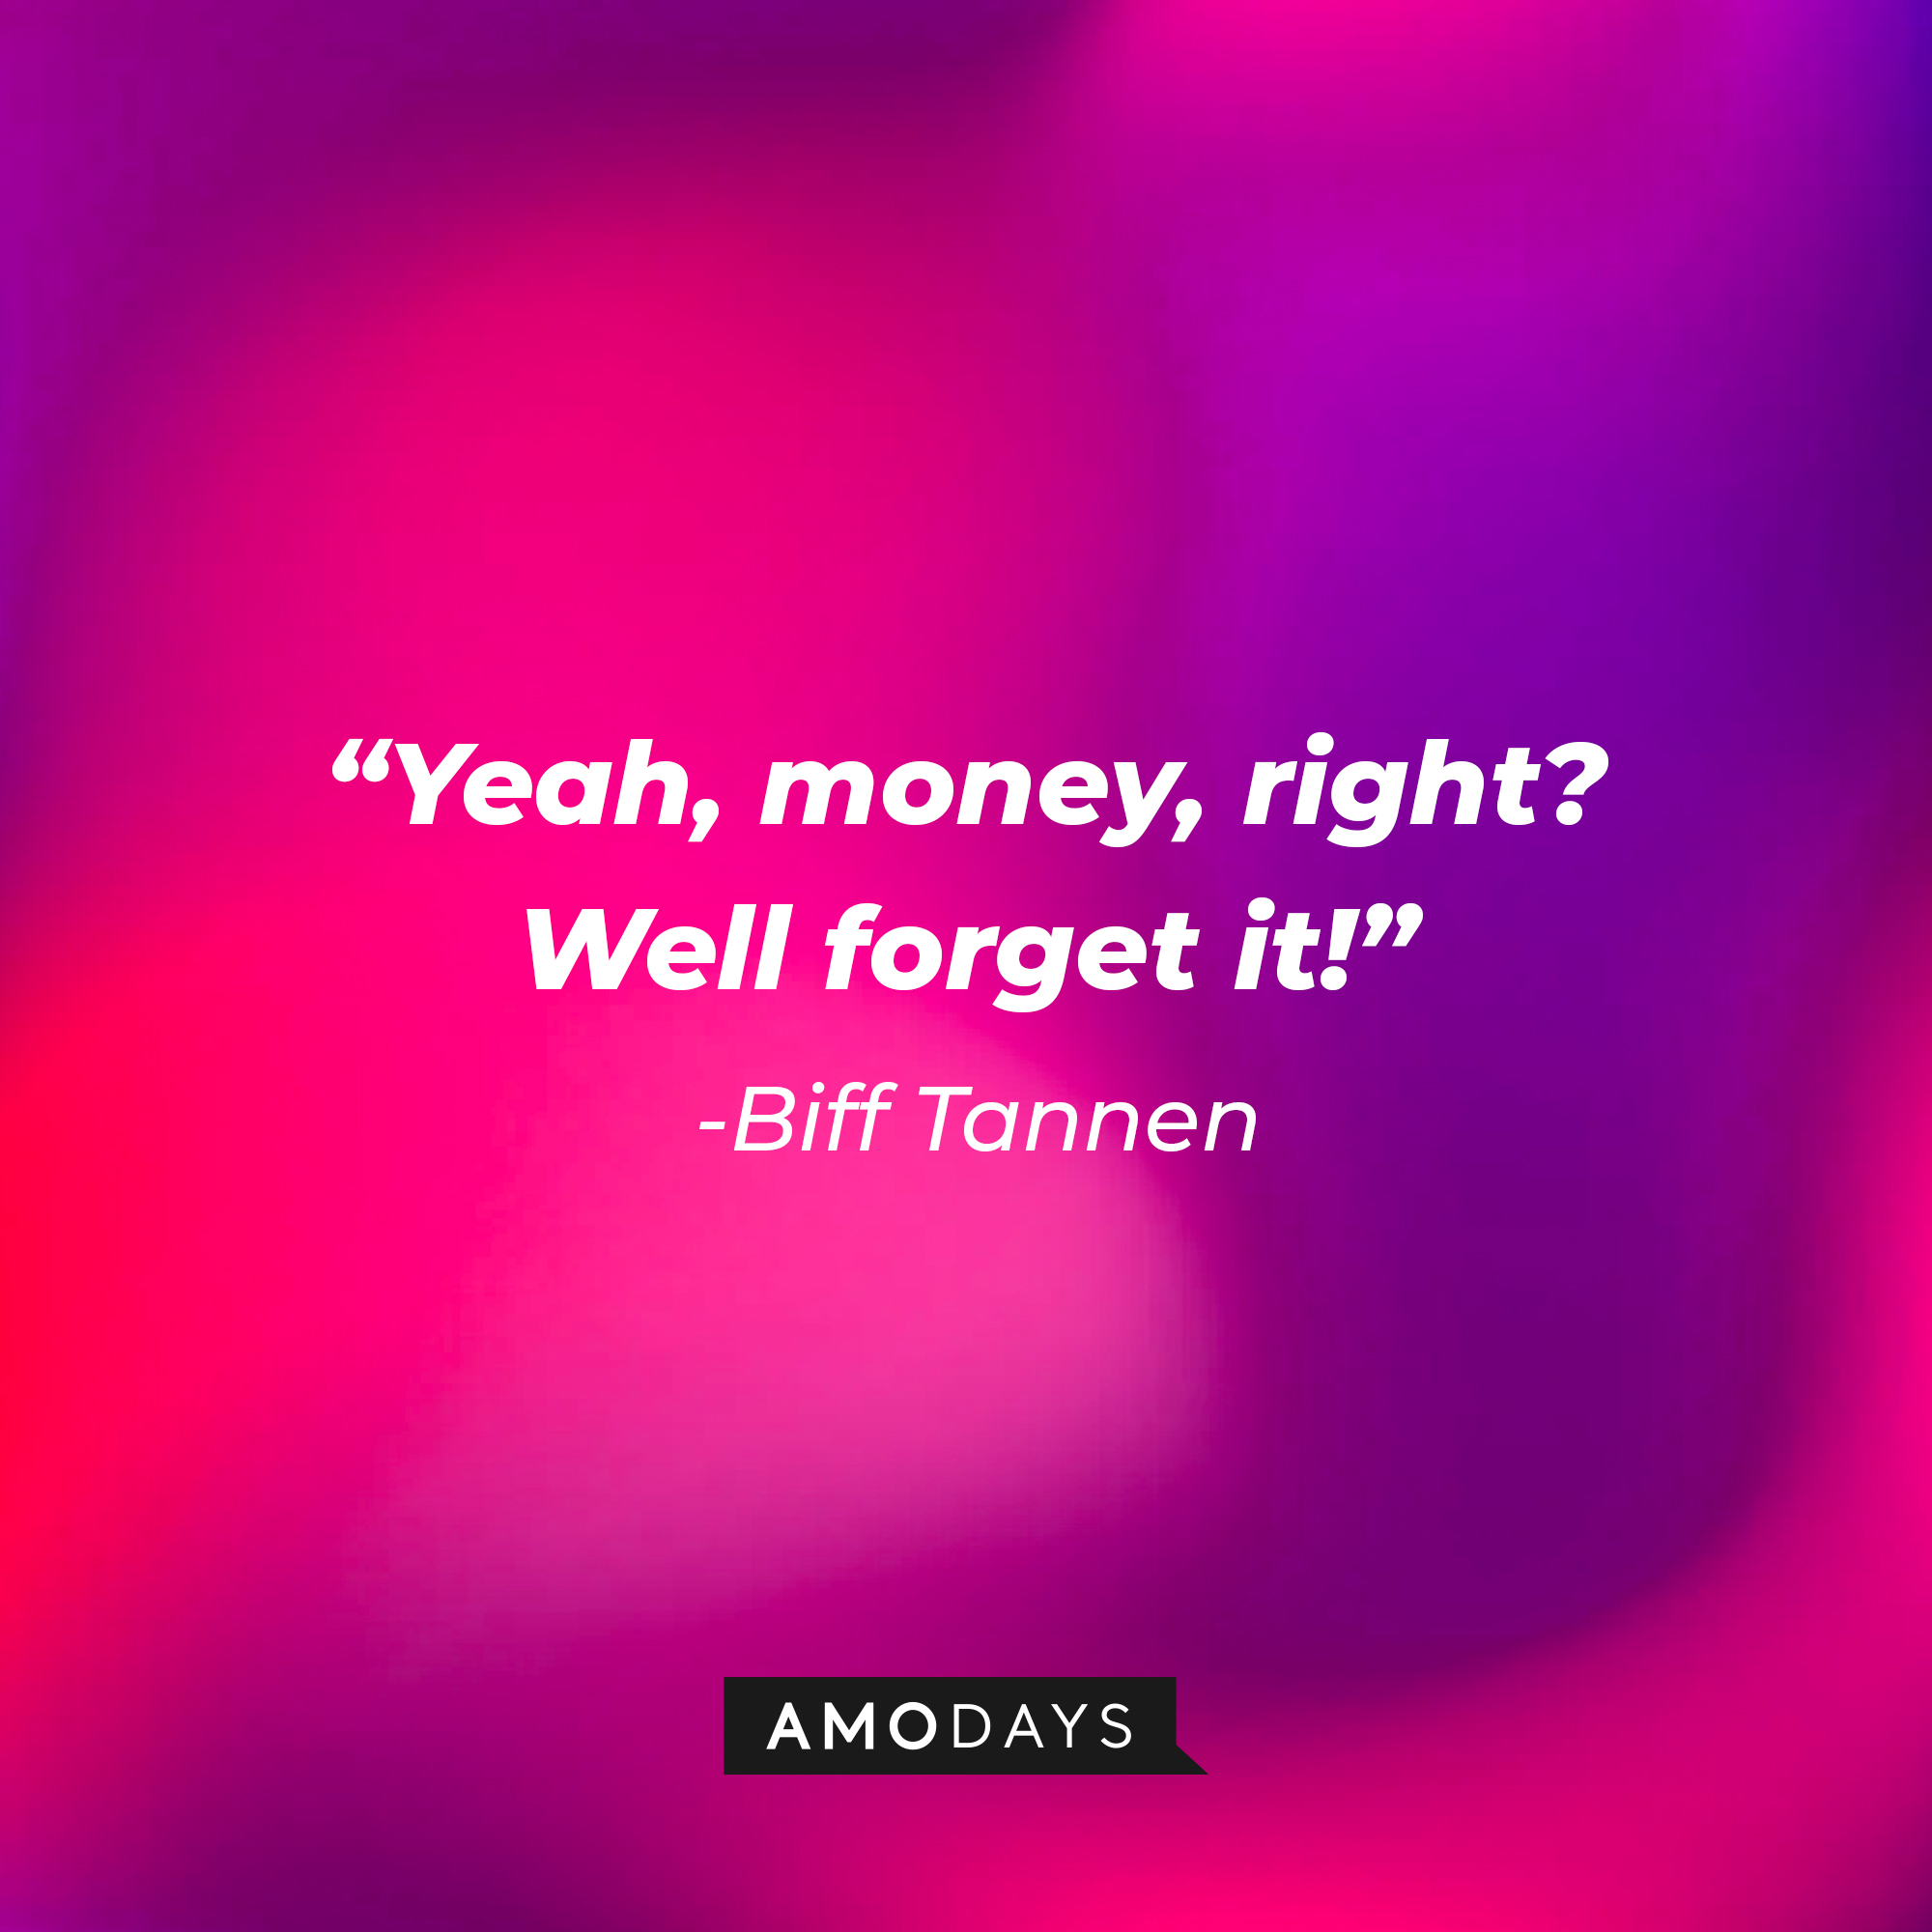 Biff Tannen’s quote: “Yeah, money, right? Well forget it!” | Source: AmoDays